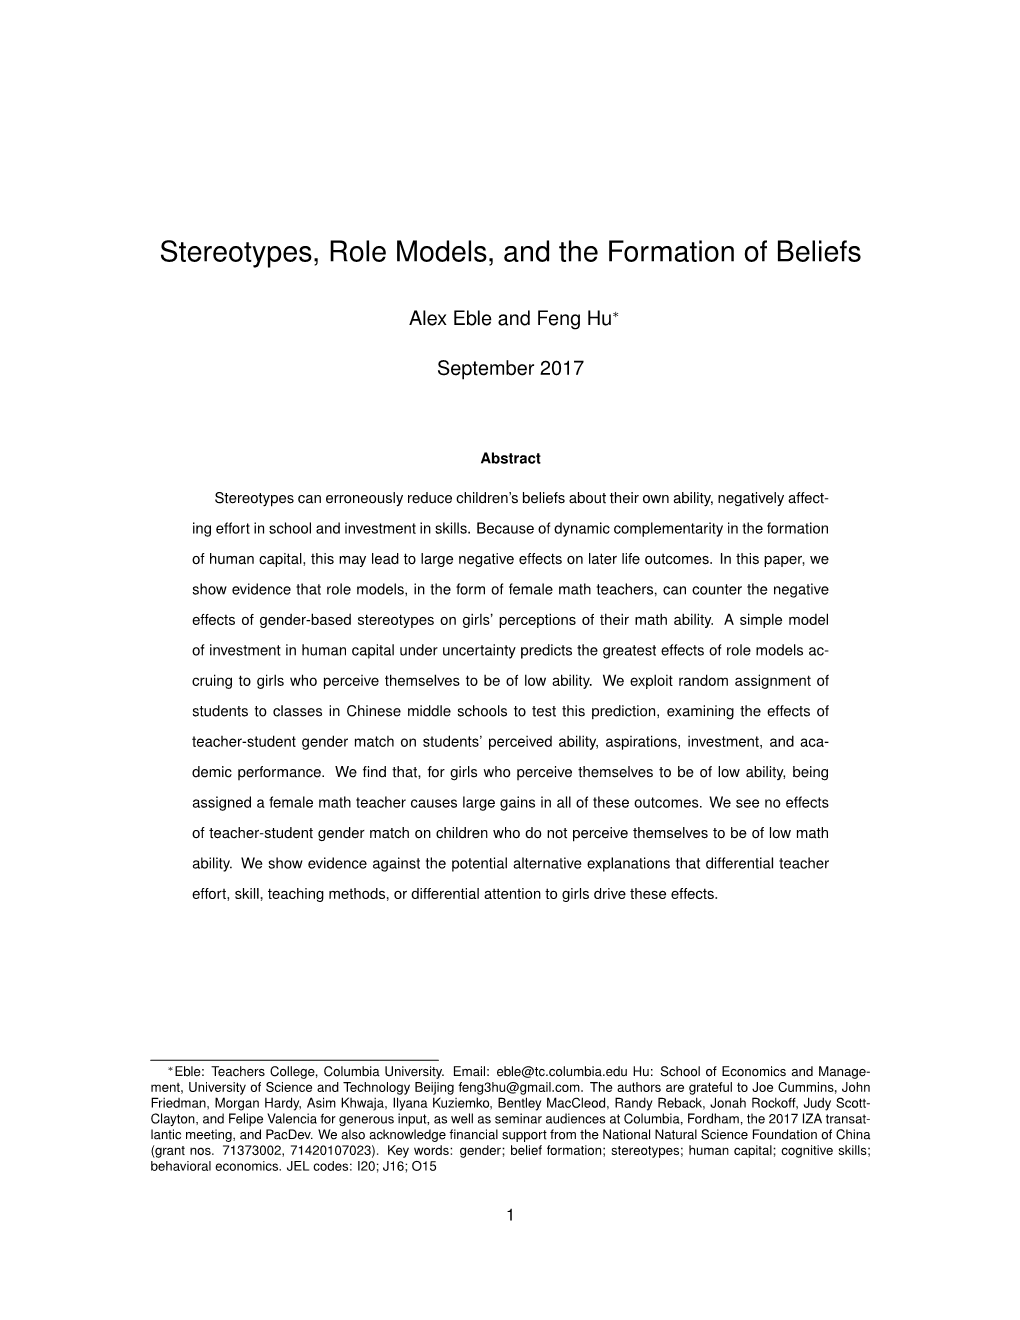 Stereotypes, Role Models, and the Formation of Beliefs